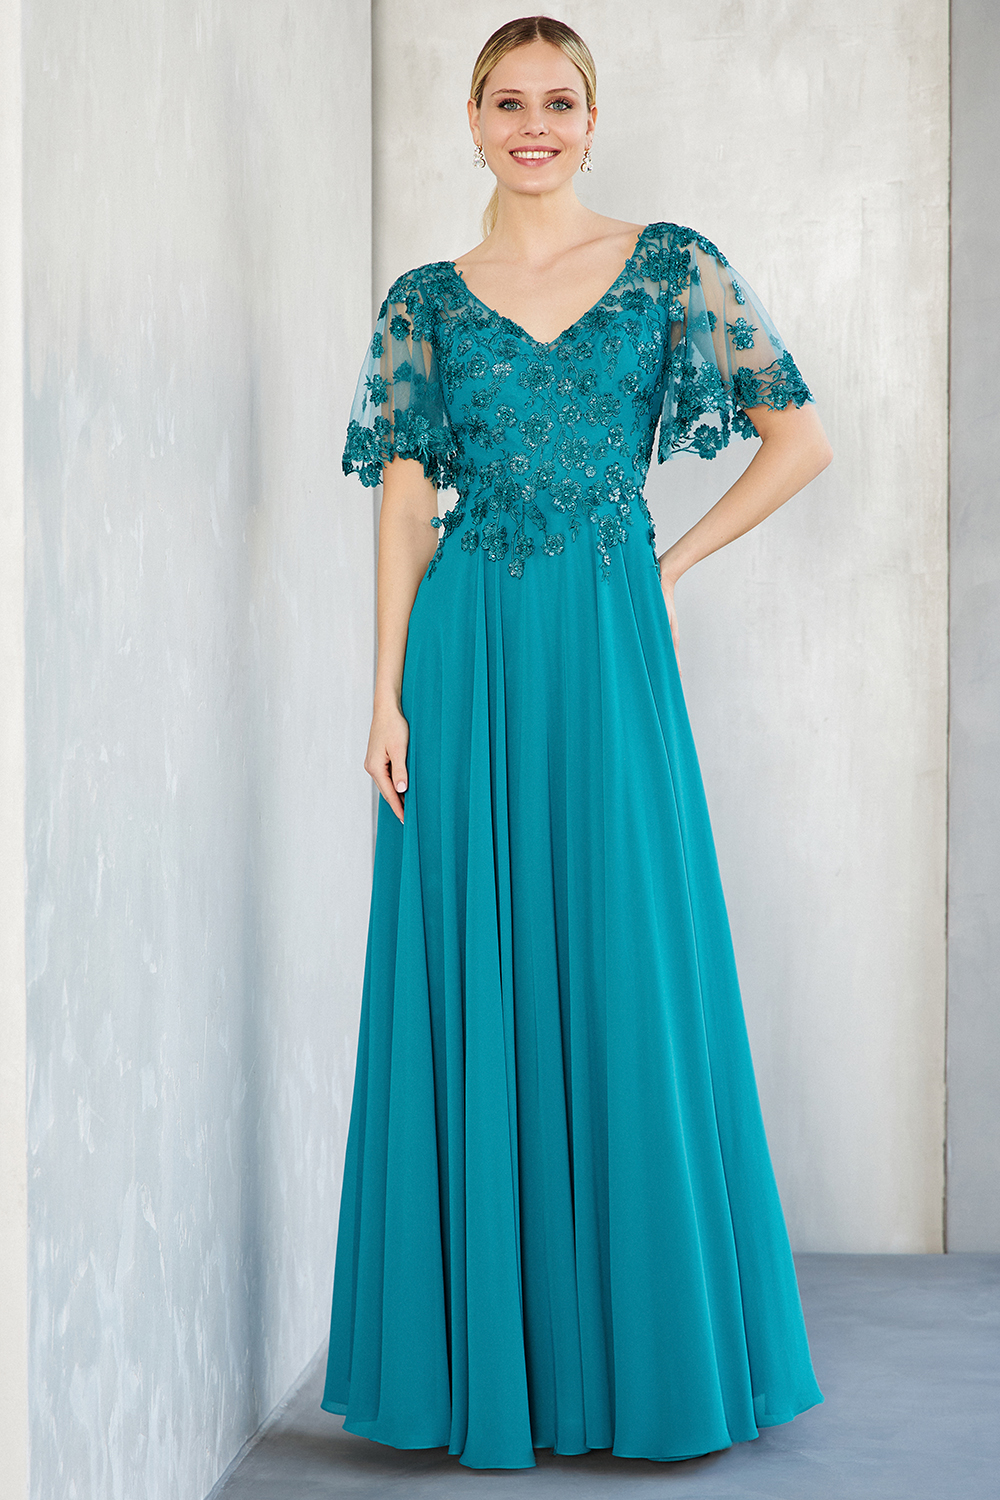 Классические платья / Long evening chiffon dress with lace top and long sleeves for the mother of the bride